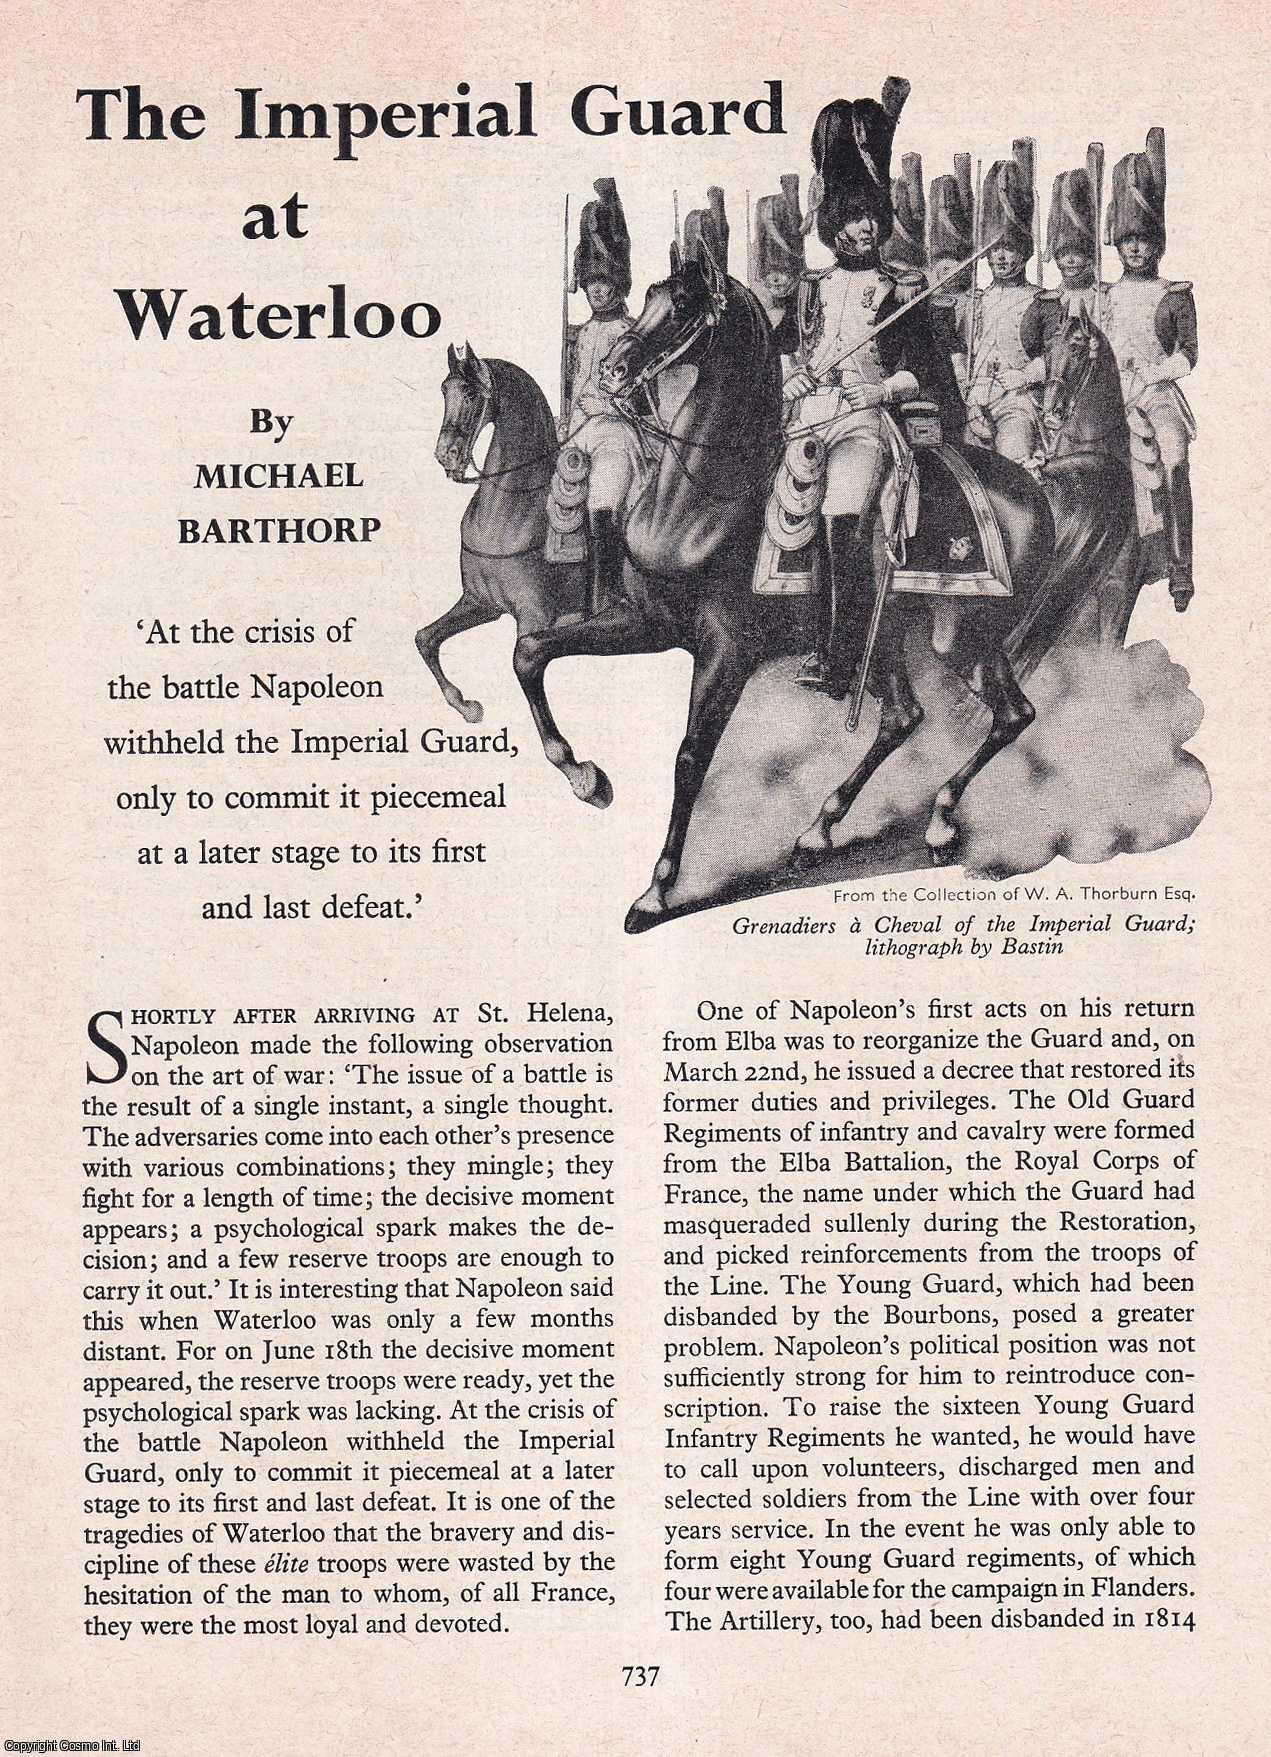 Michael Barthorp - The Imperial Guard at Waterloo (Battle of Napoleon). An original article from History Today magazine, 1966.